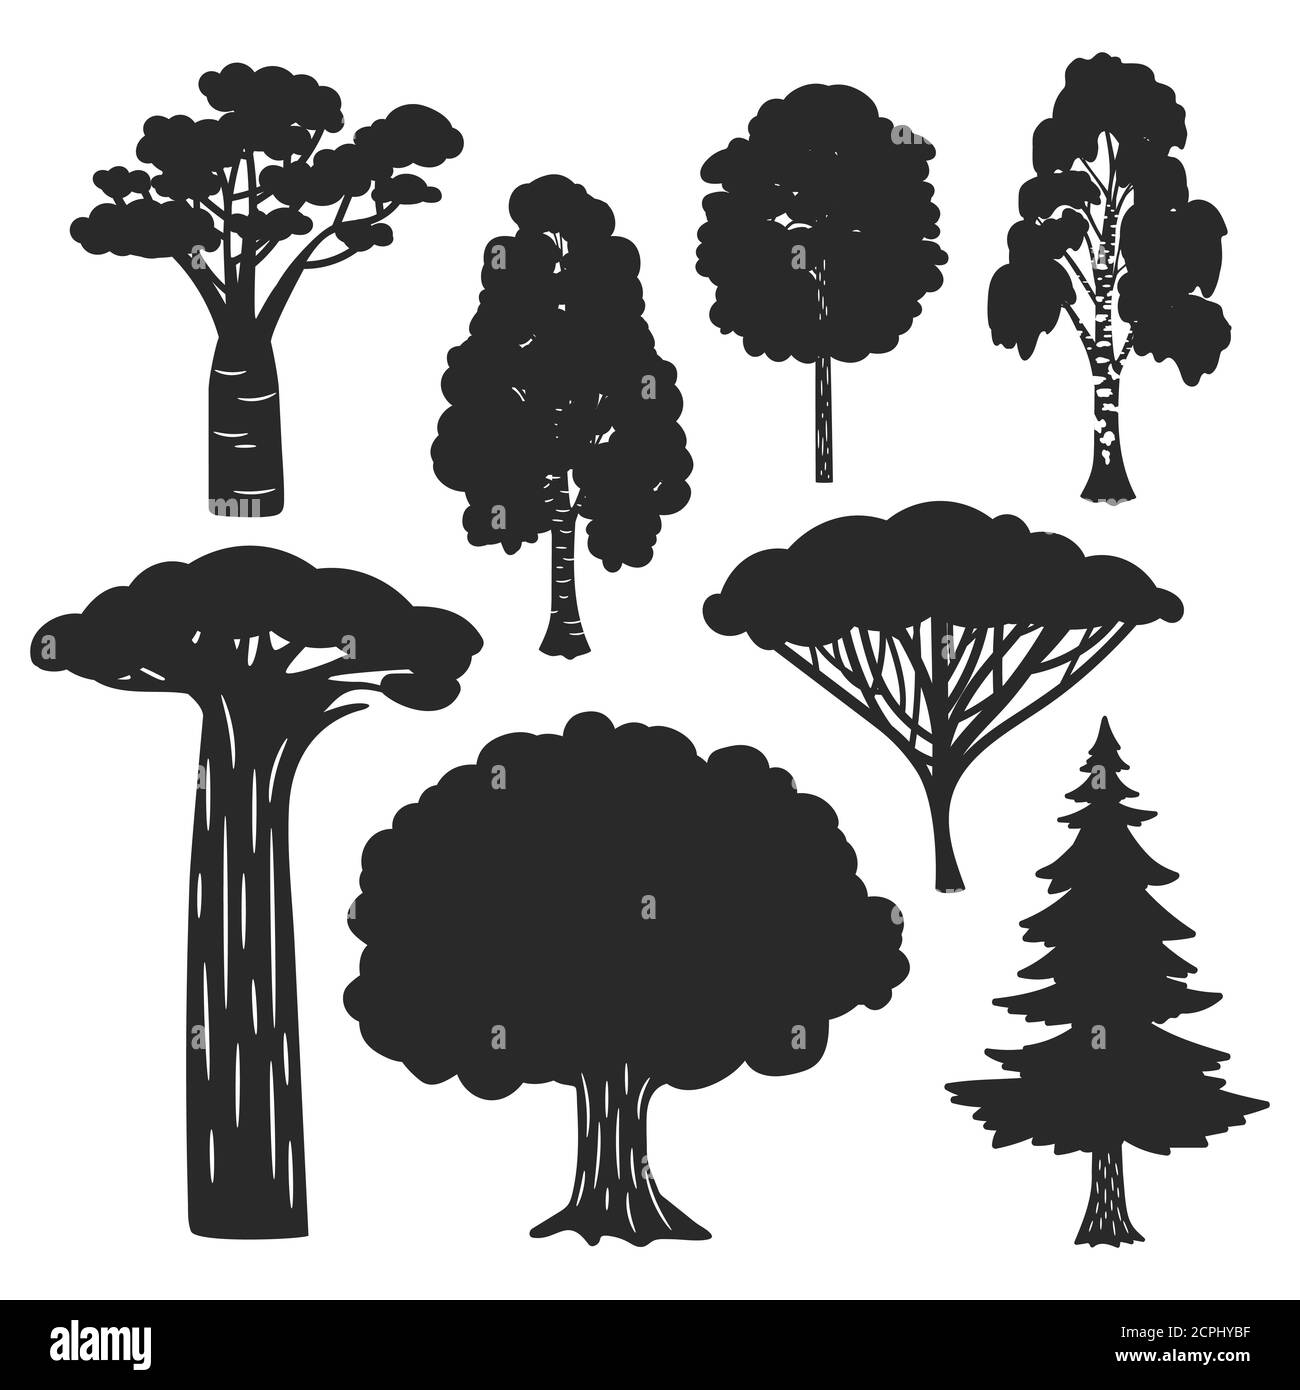 Vector trees forest black silhouettes isolated on white background. Birch and oak, evergreen pine silhouette illustration Stock Vector